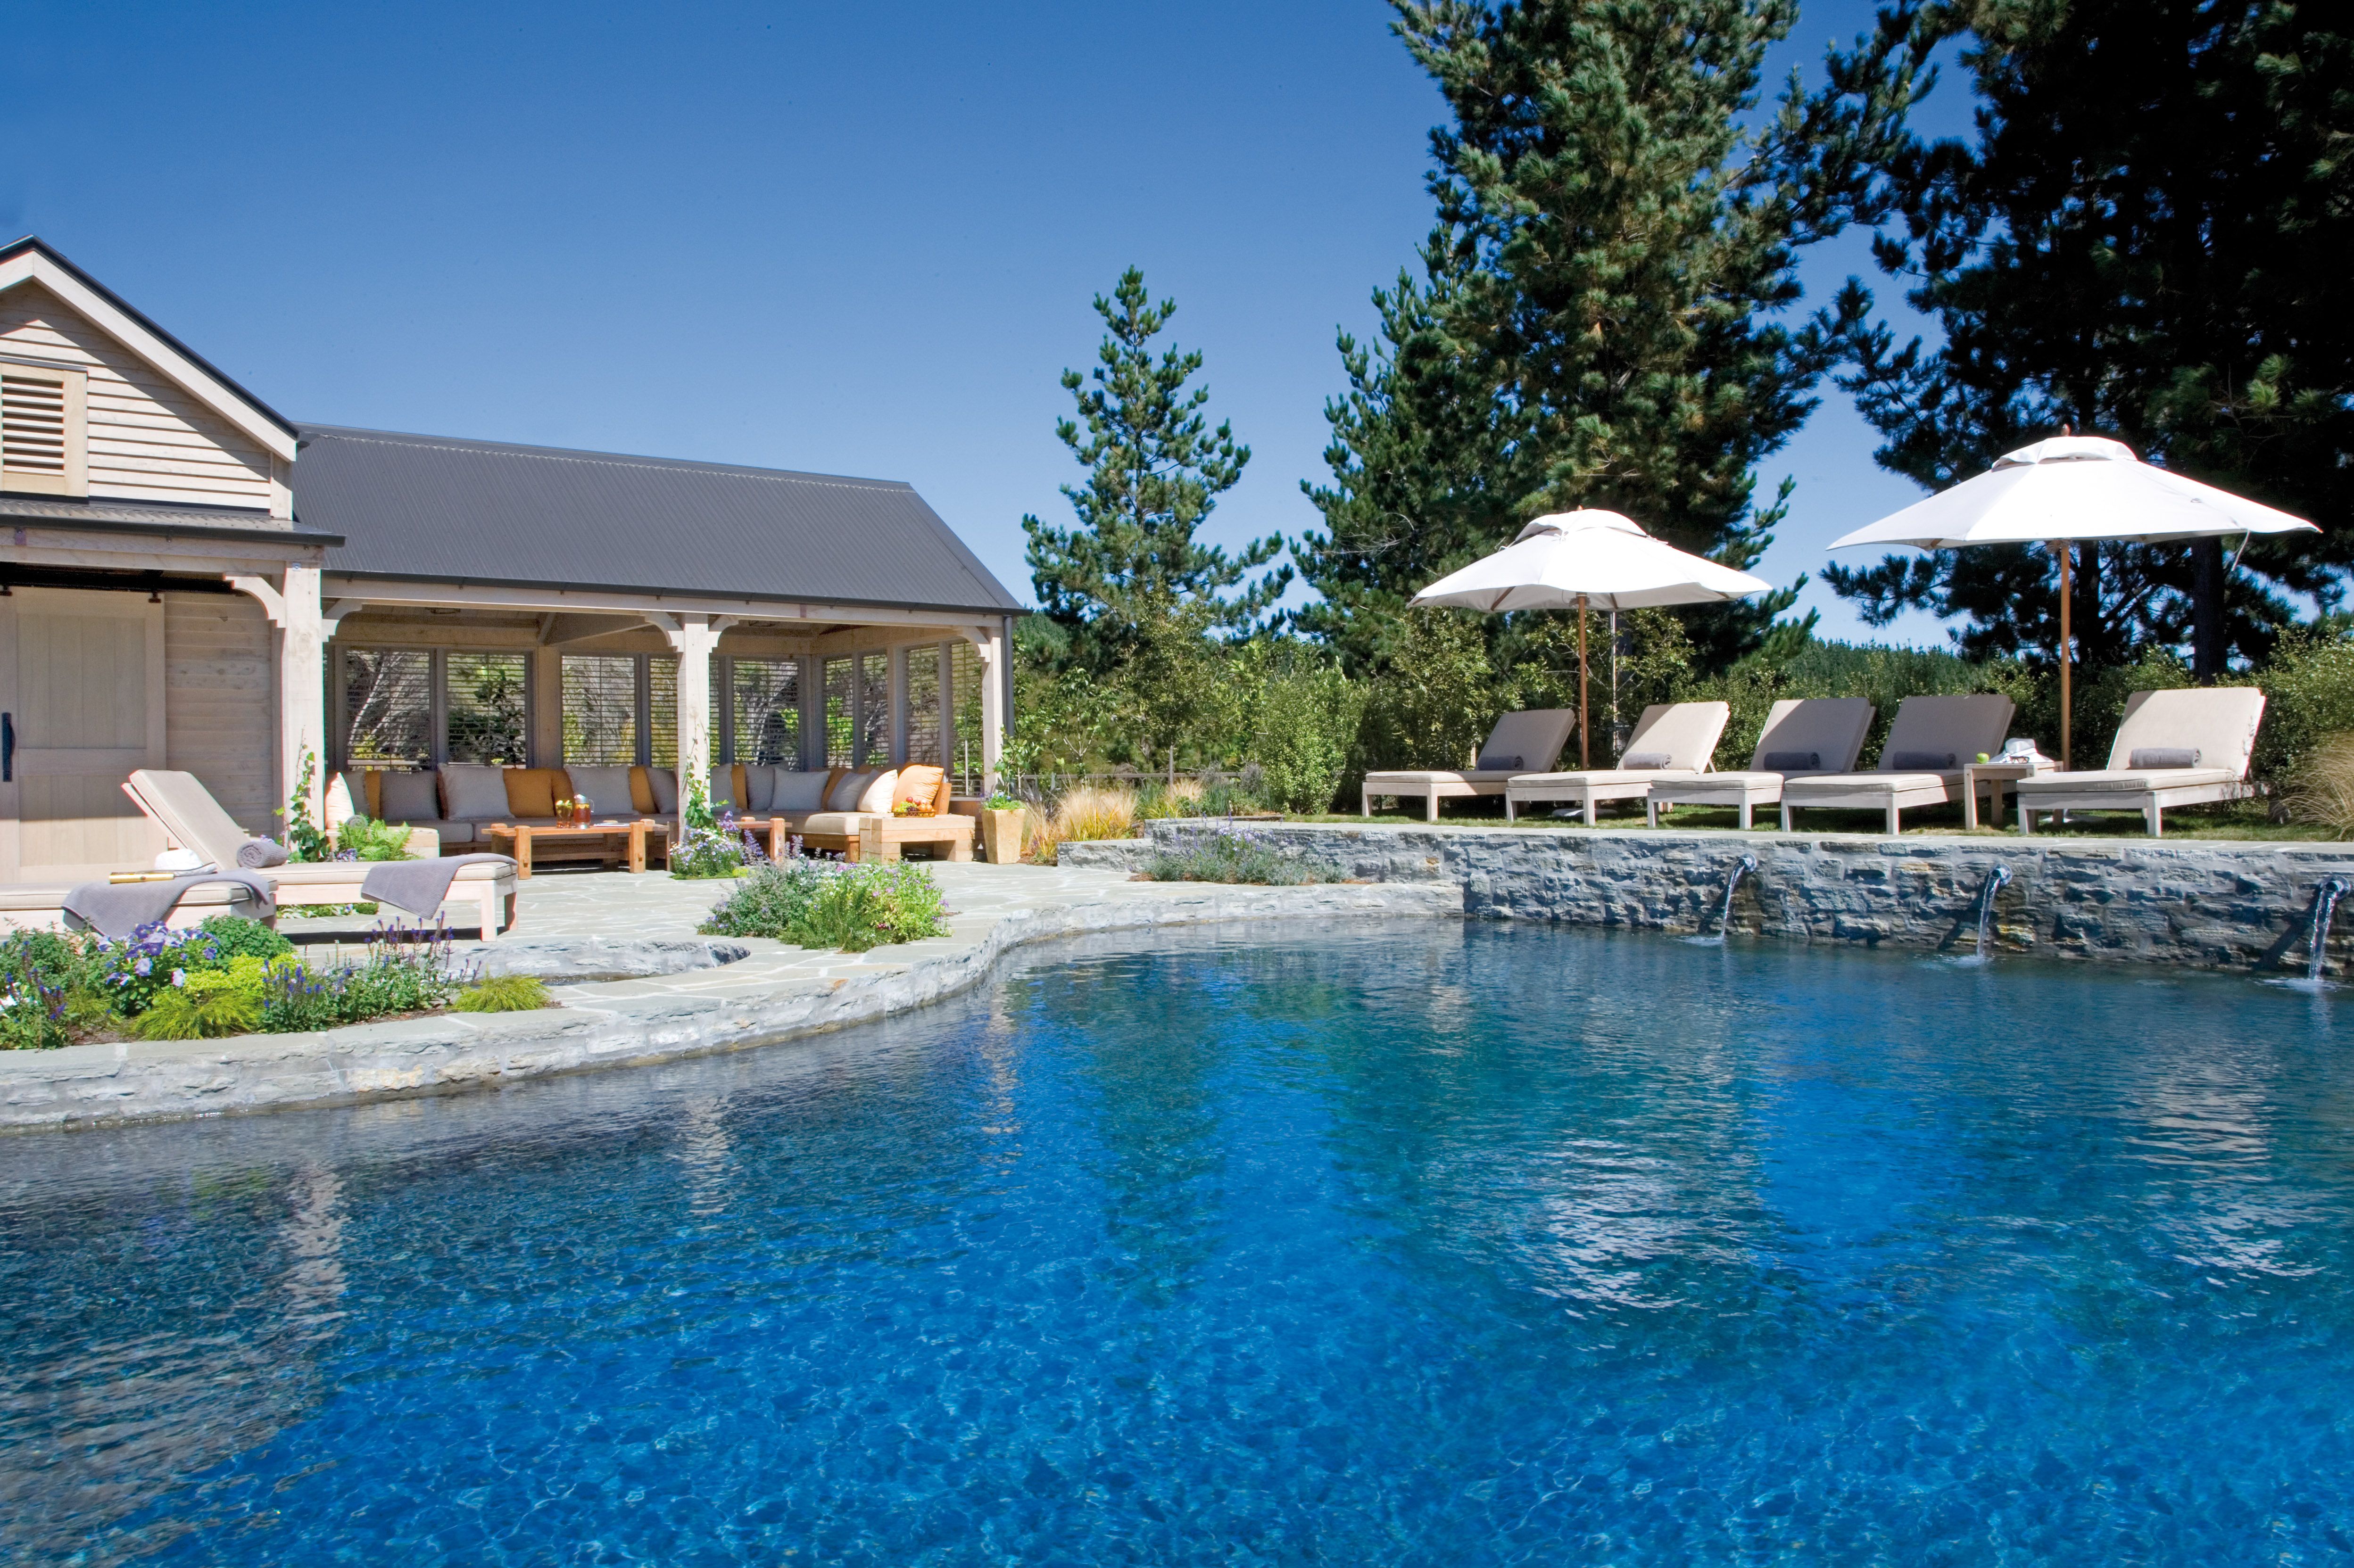 Pool and Cabana at Cape Kidnappers, New Zealand ©Farm at Cape Kidnappers